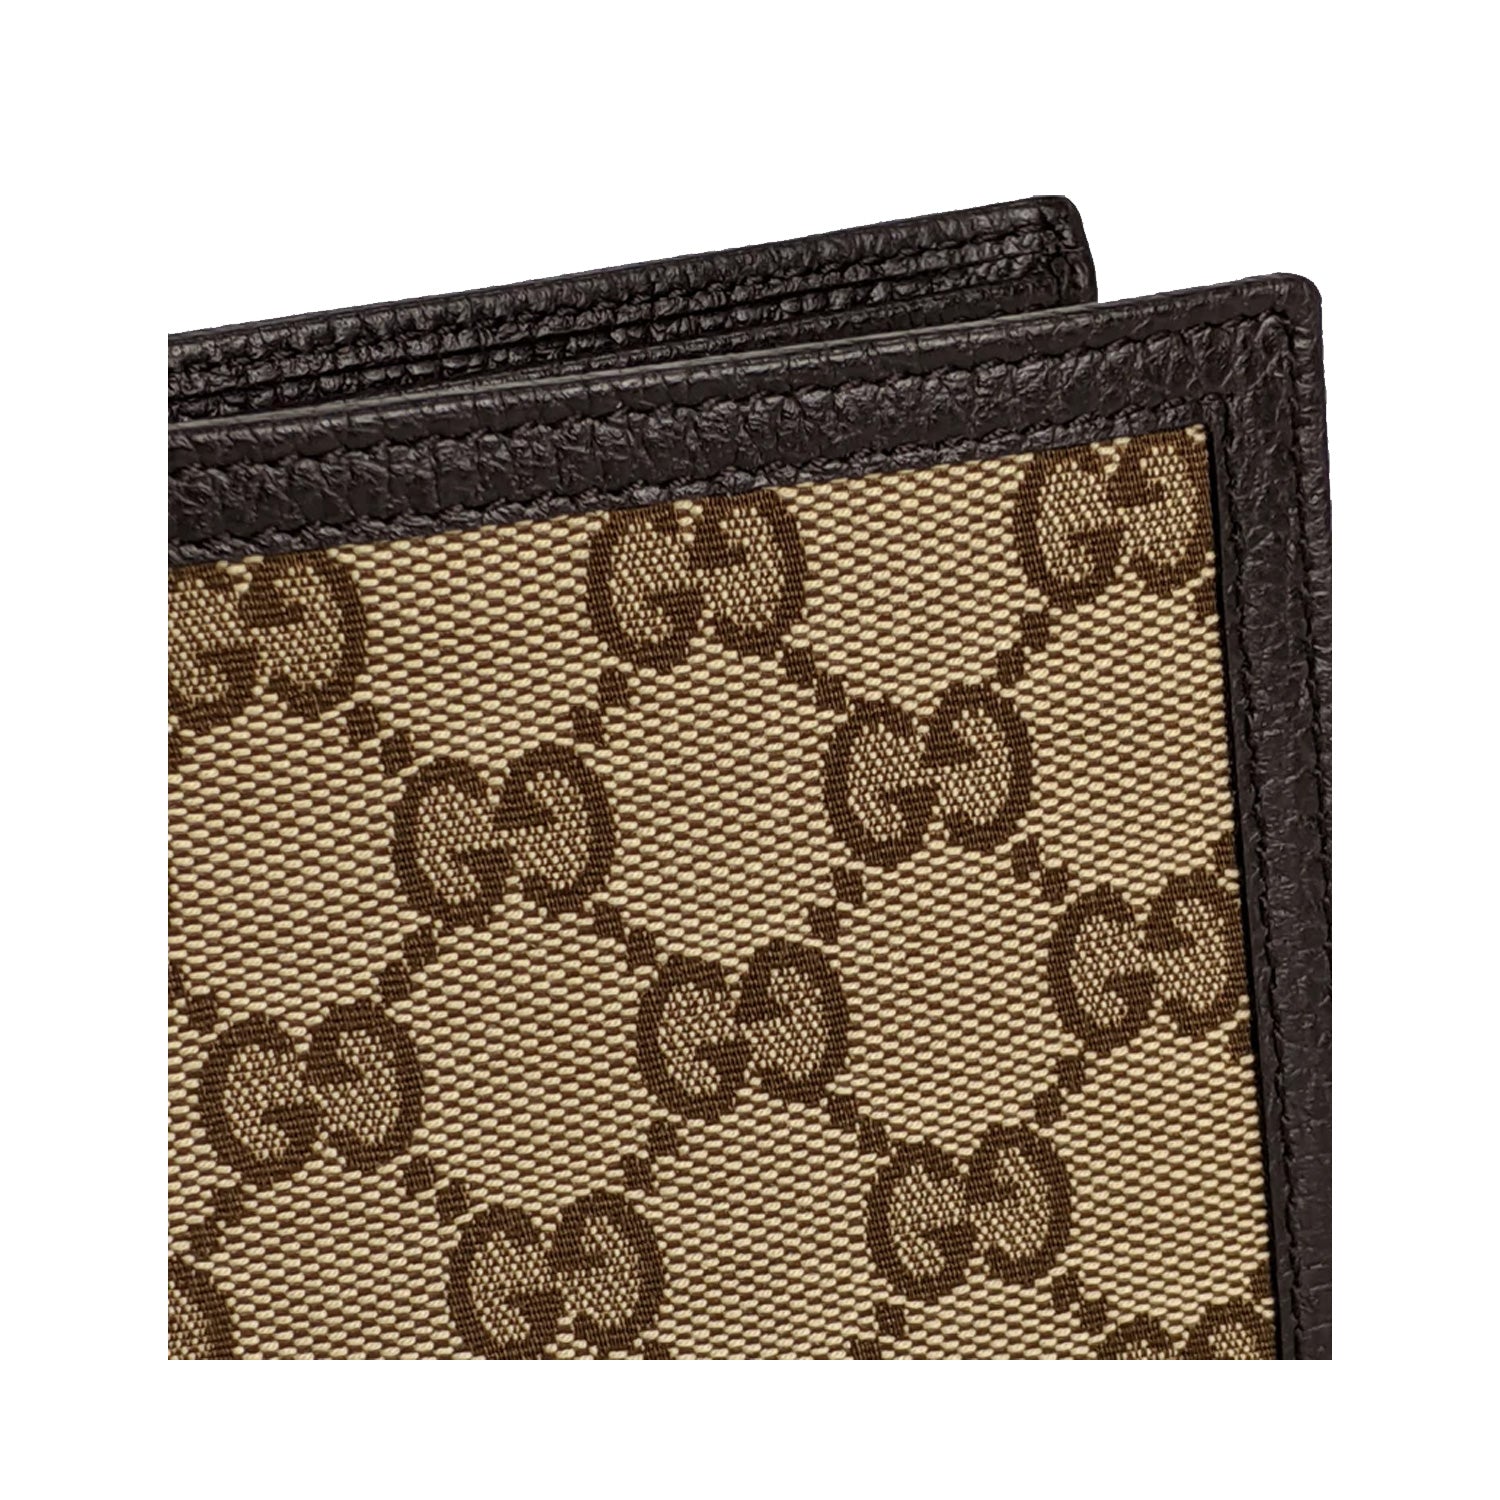 Beige - 181092 – dct - mens gucci leather wallets - Leather